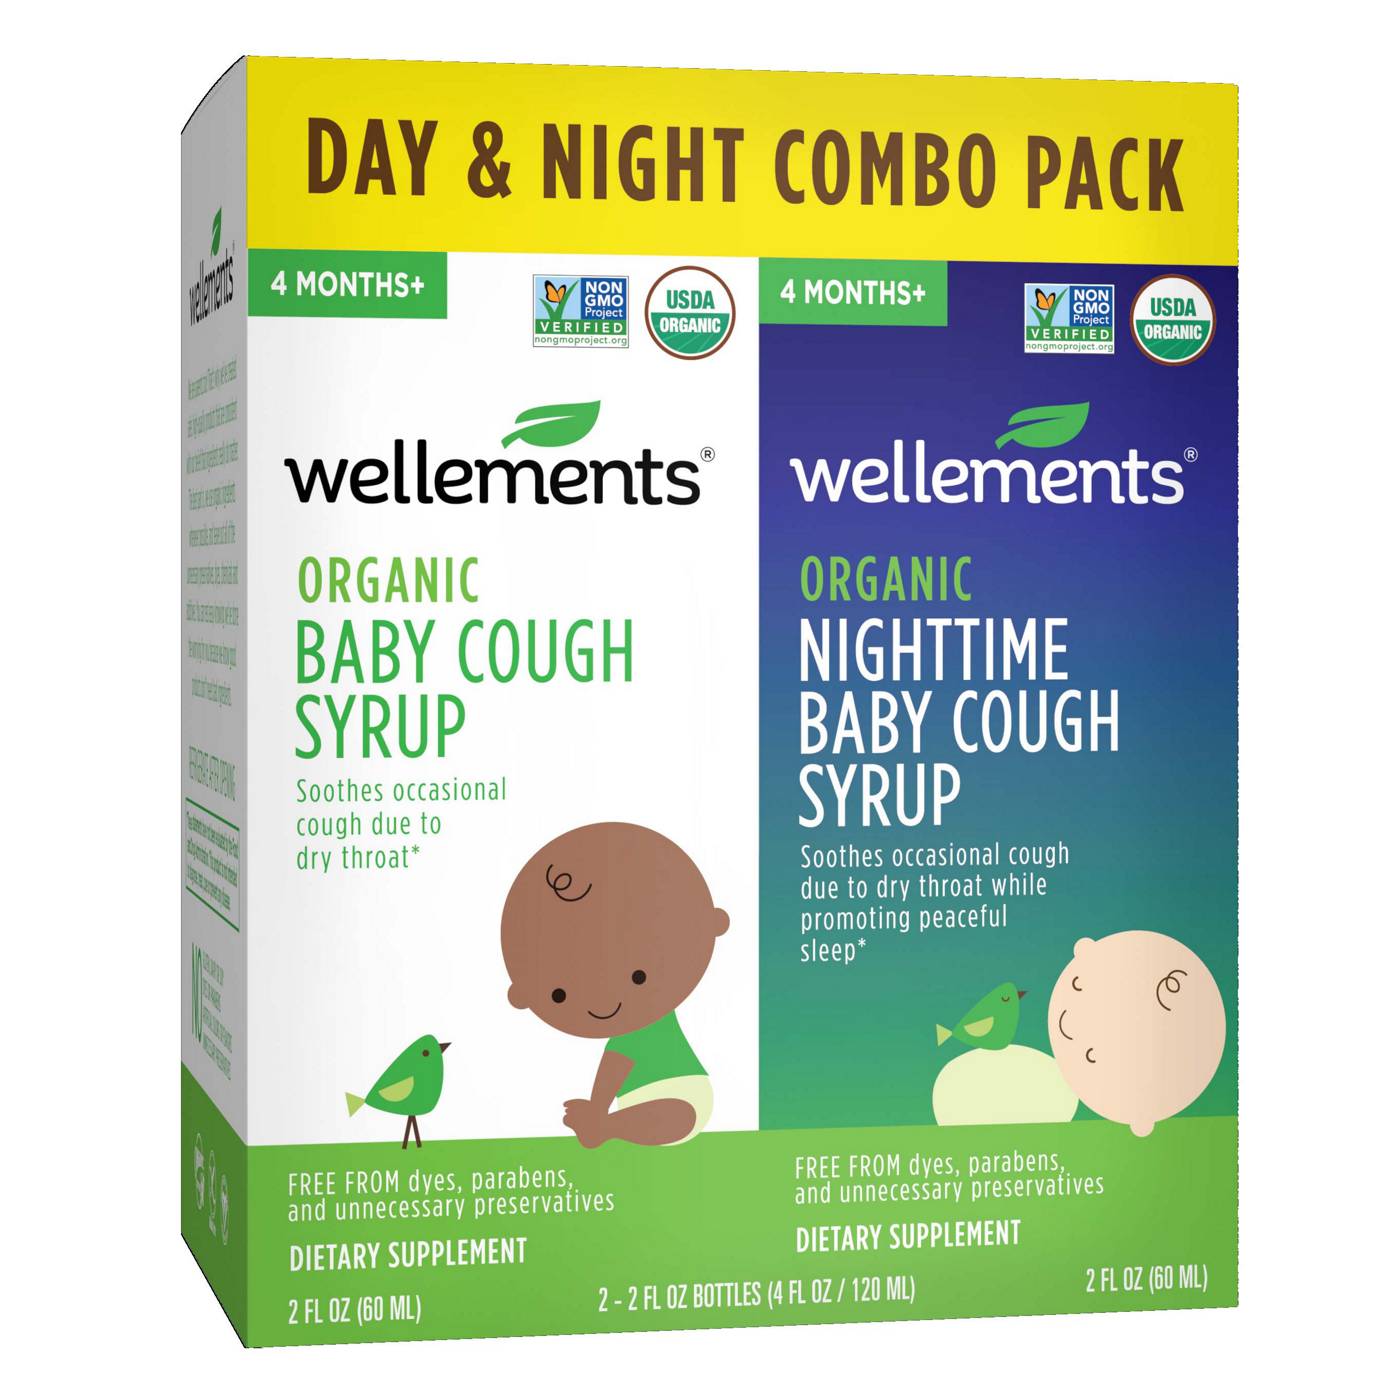 Wellements Organic Baby Cough & Mucus Syrup Day & Night Combo Pack; image 1 of 2